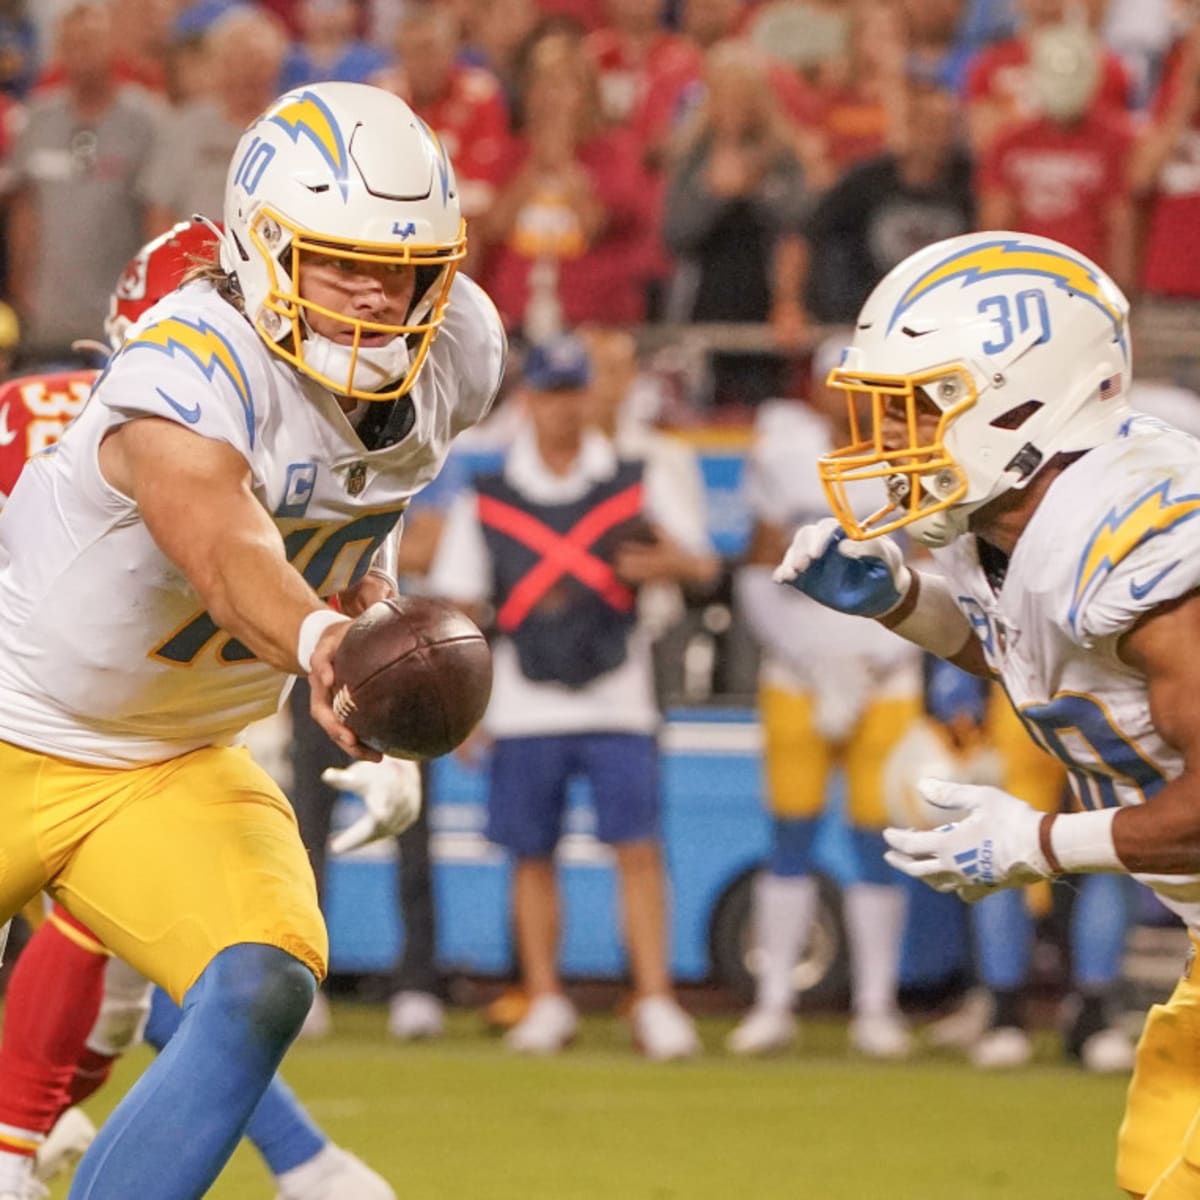 Chargers News: Chargers-Chiefs Week 11 matchup flexed to Sunday